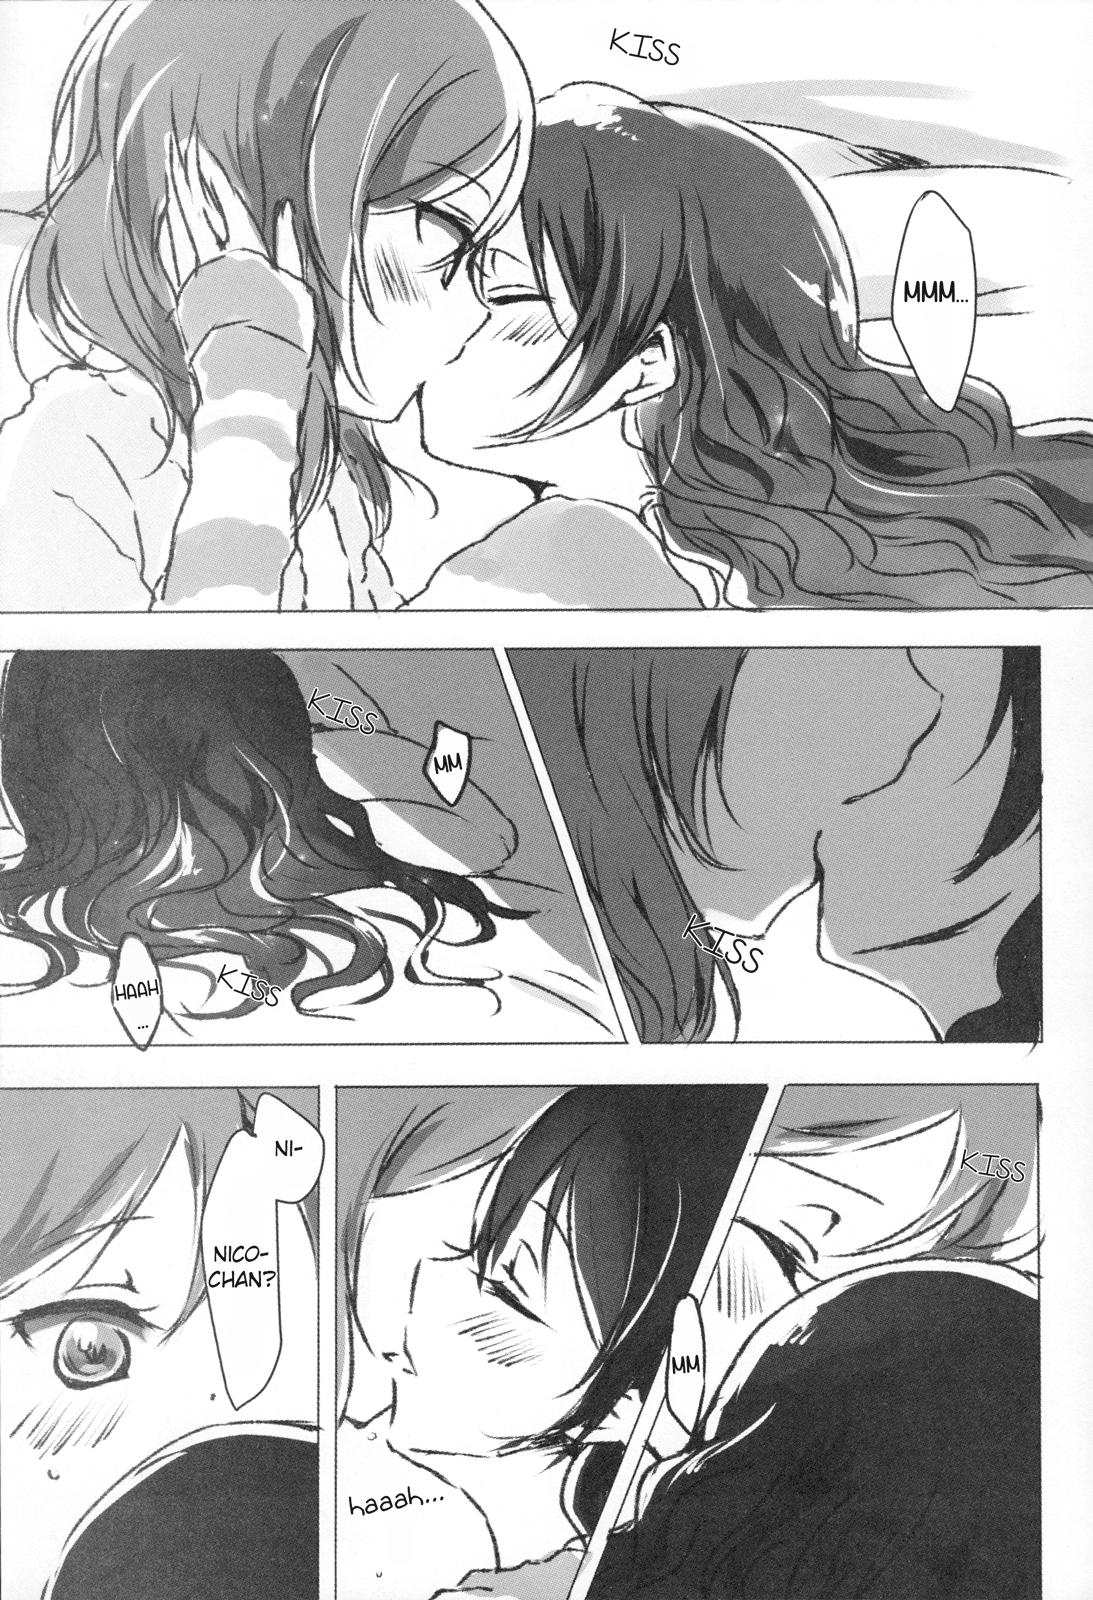 Bwc Ohayou, Oyasumi | Good Morning, Good Night - Love live Best Blowjobs Ever - Page 4